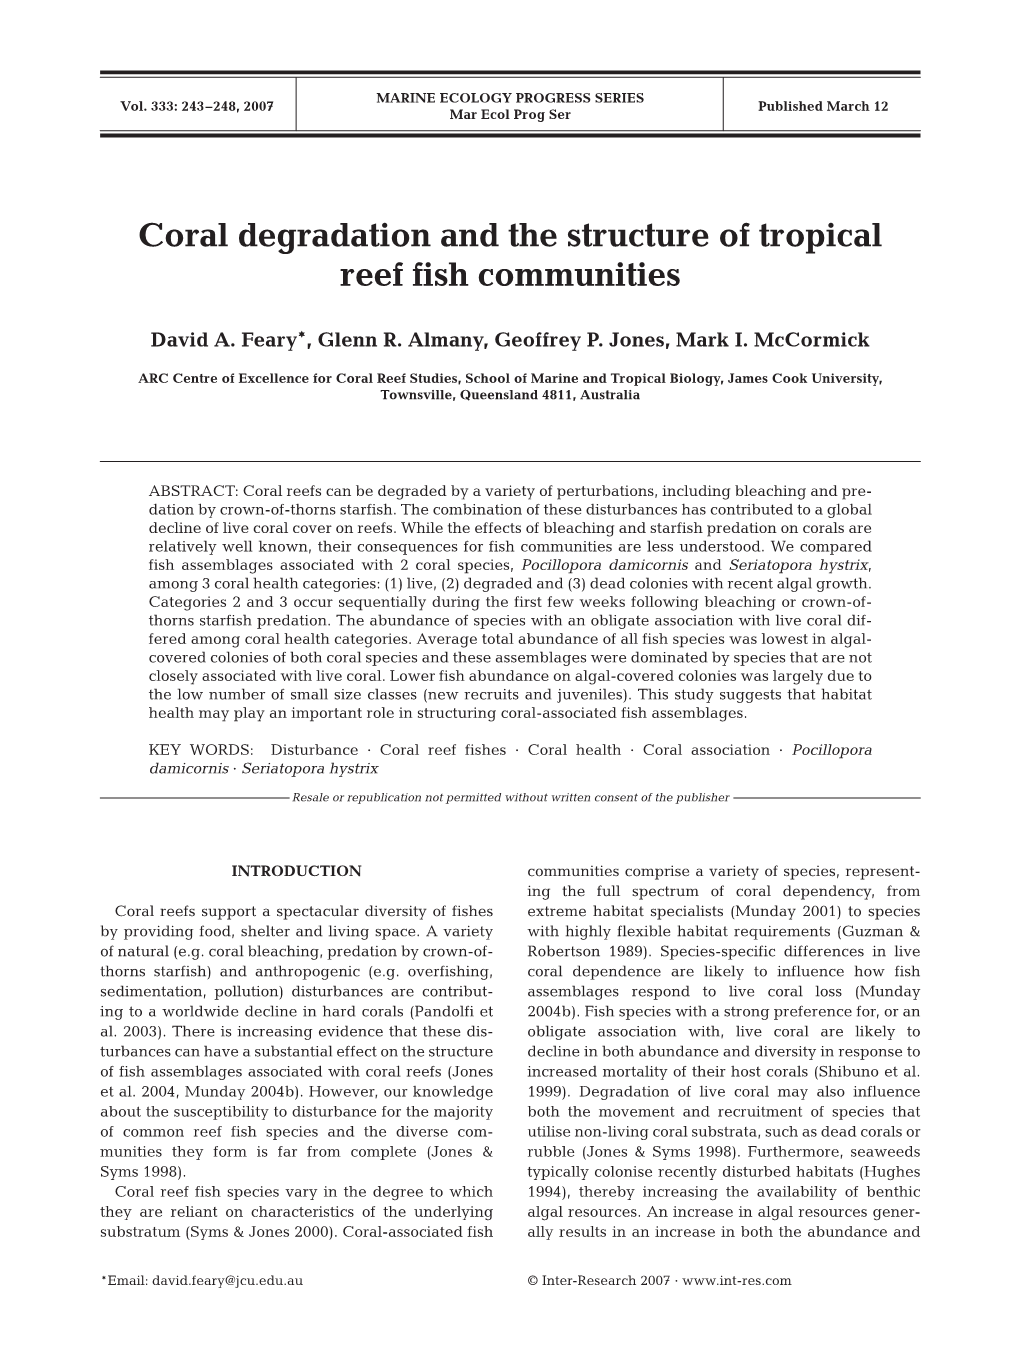 Coral Degradation and the Structure of Tropical Reef Fish Communities